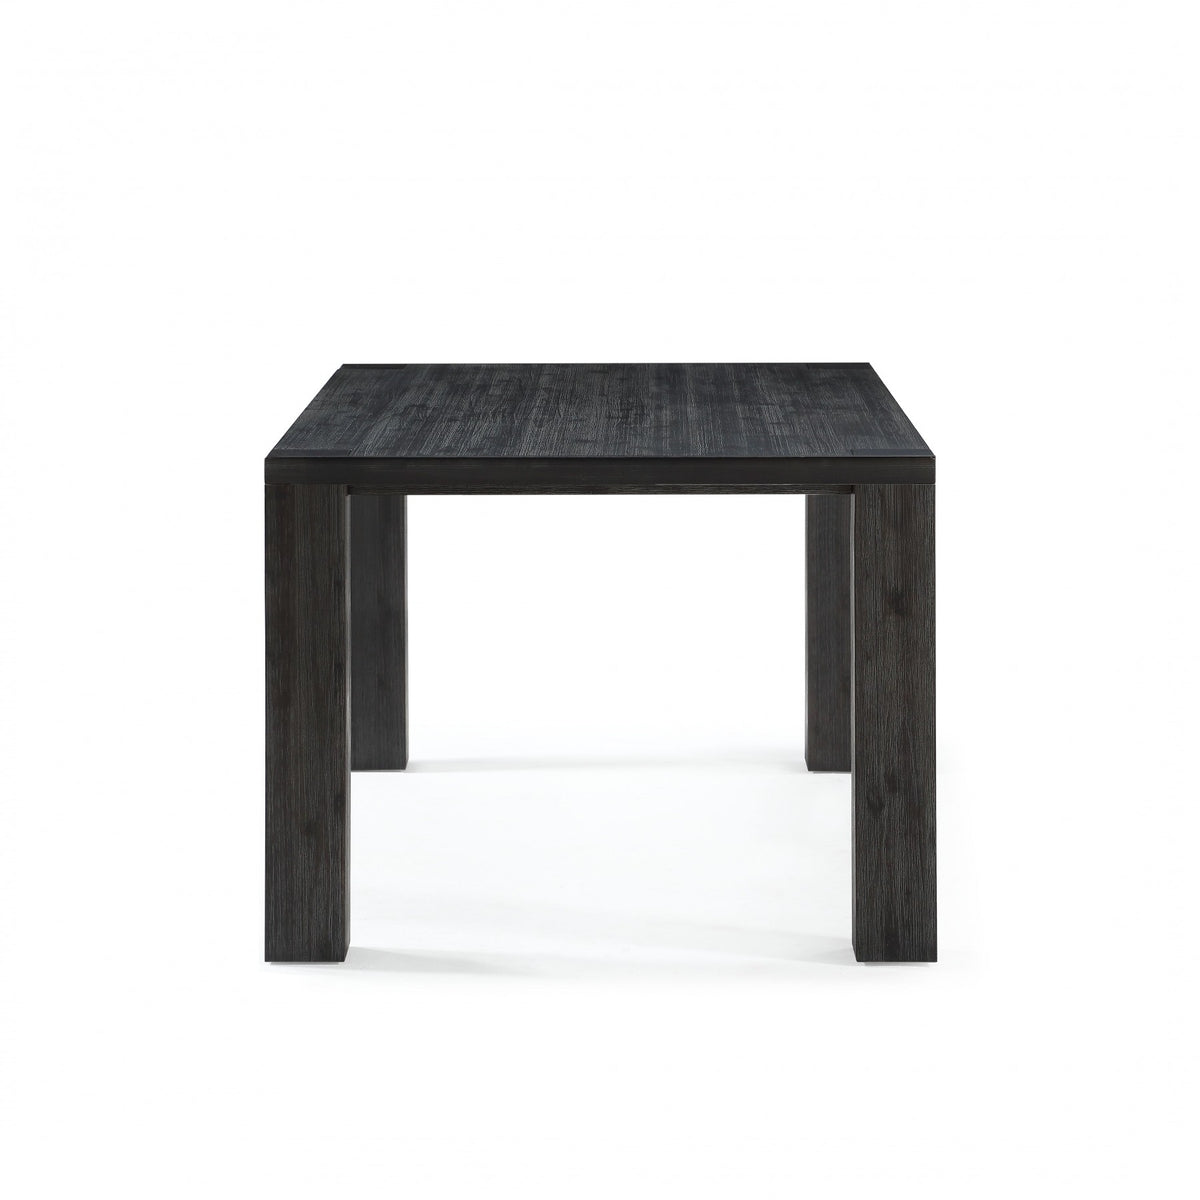 Meadow Table - Be Bold Furniture